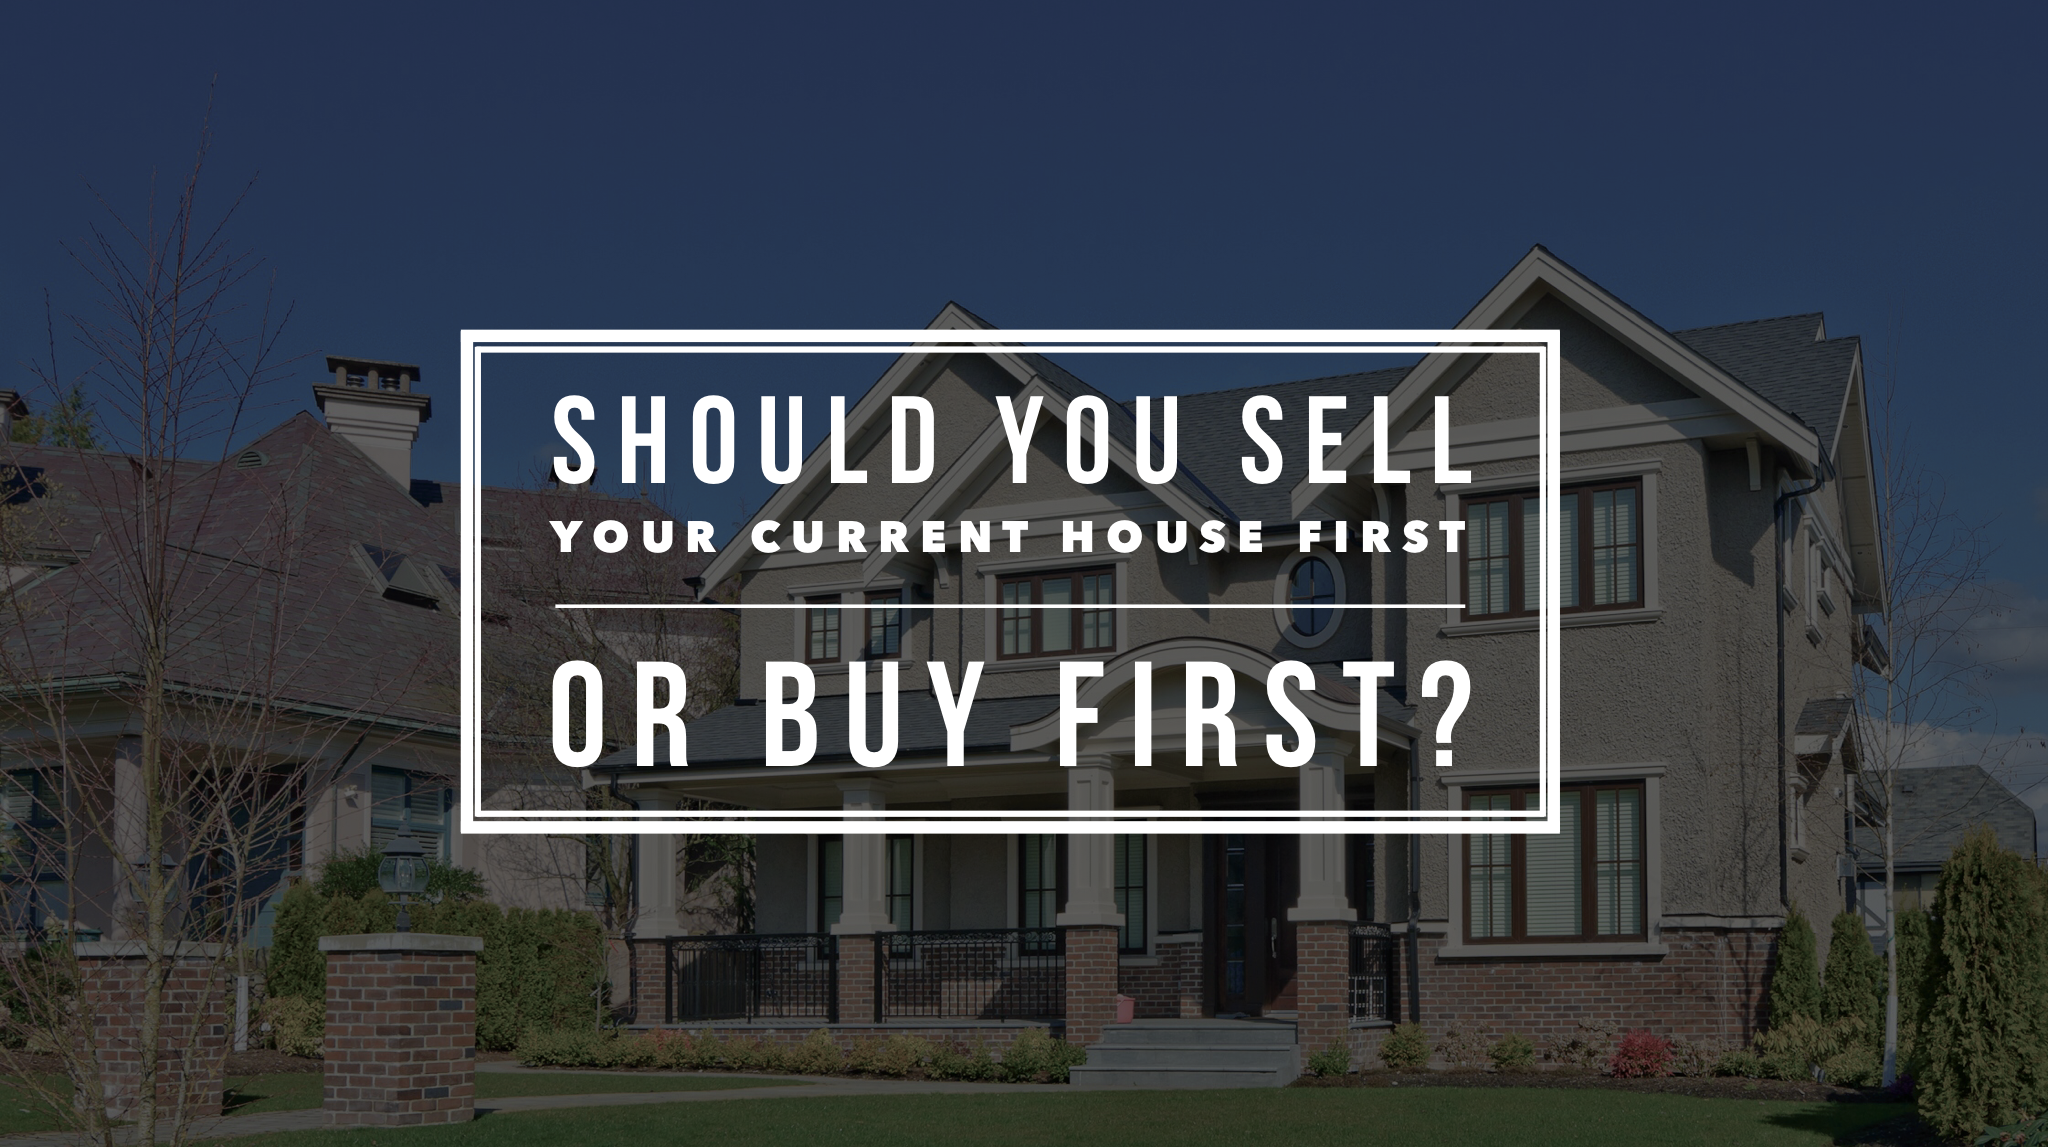 How To Buy A House Before You Sell Yours Should You Sell My Current Home First or Buy First?